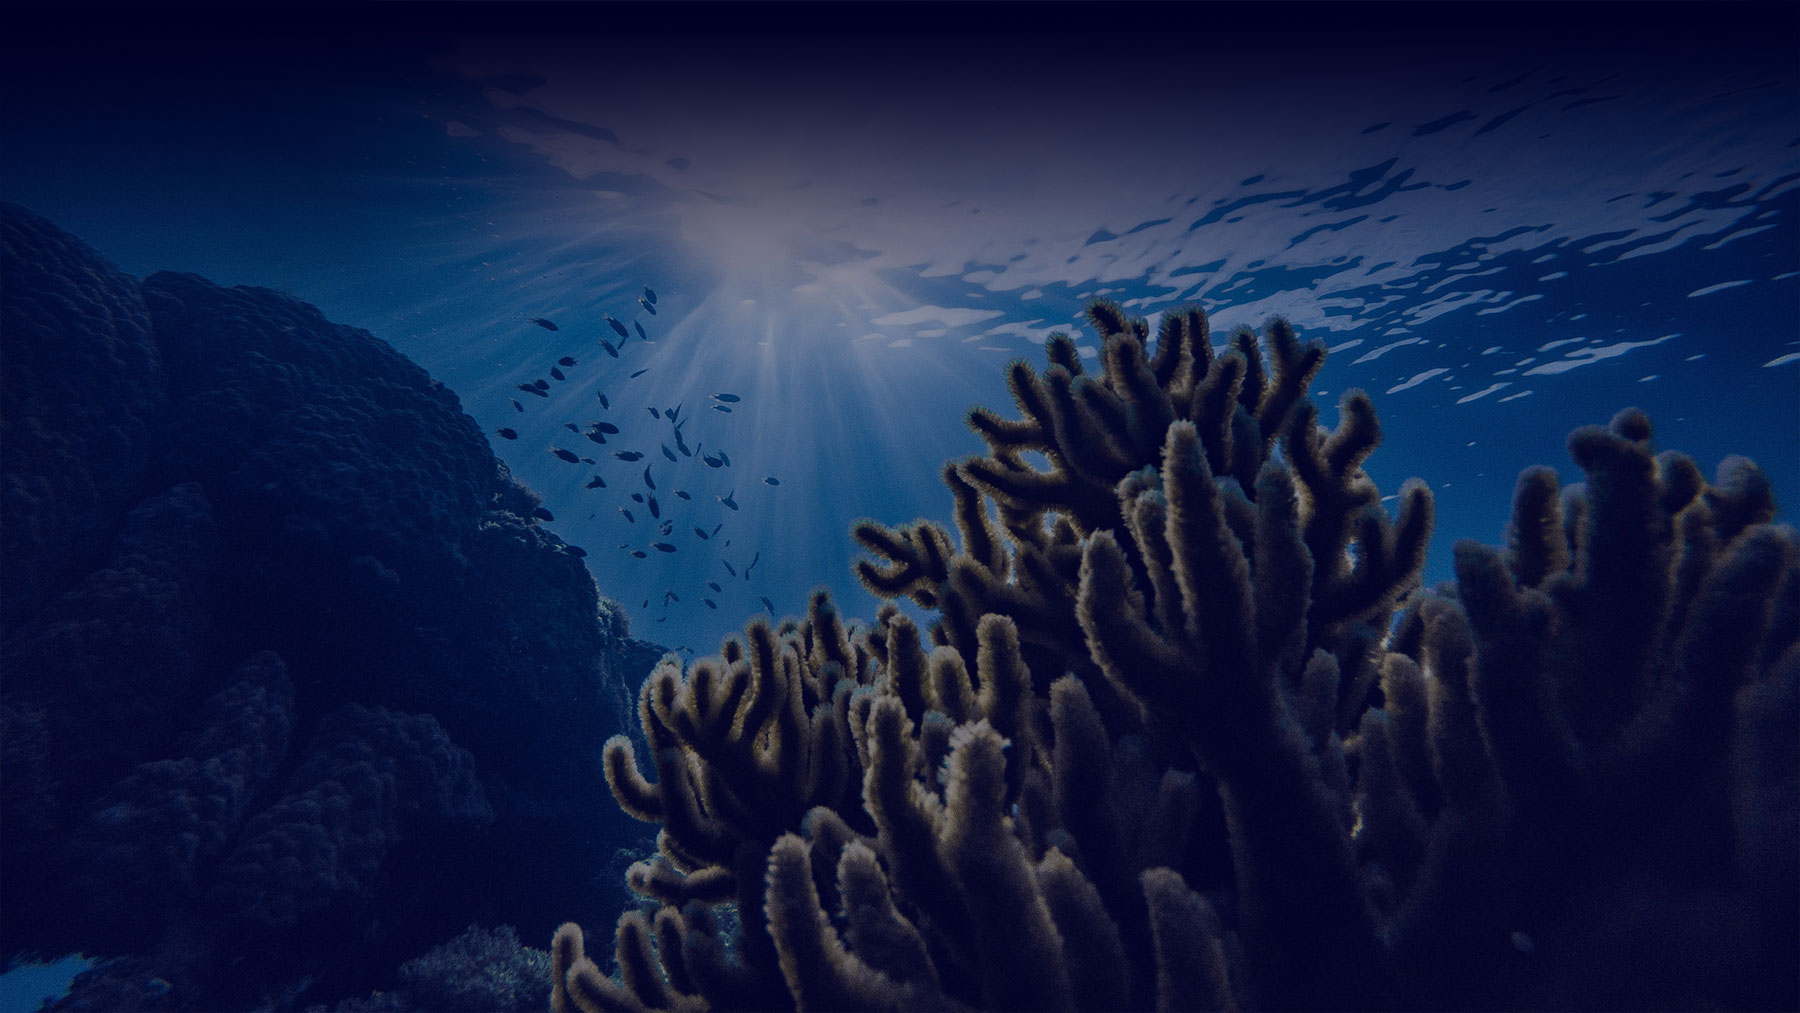 Undersea photo of a reef with a school of fish swimming in front of sun light beams refracting through the ocean surface.